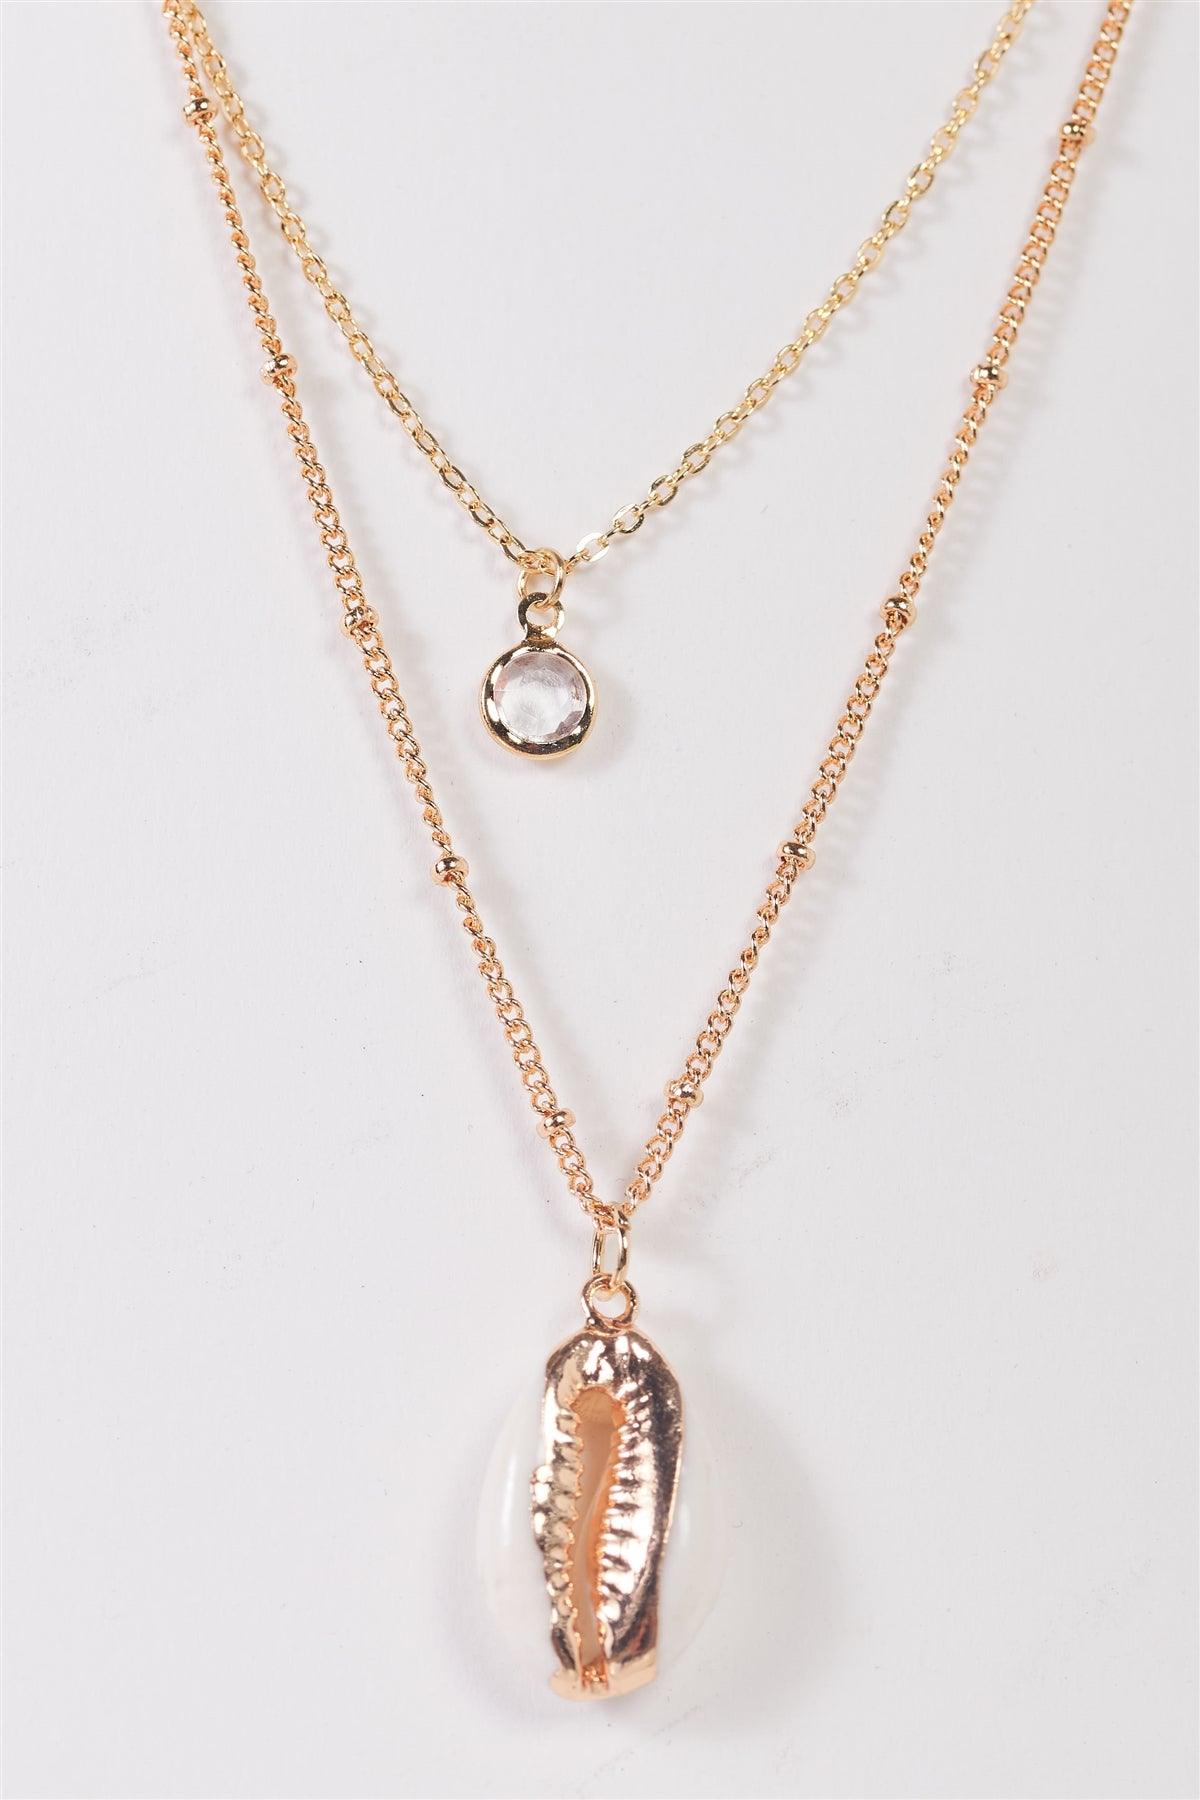 Gold & Ivory Faux Shell Double Chain With Crystal Pendant Necklace /3 Pieces